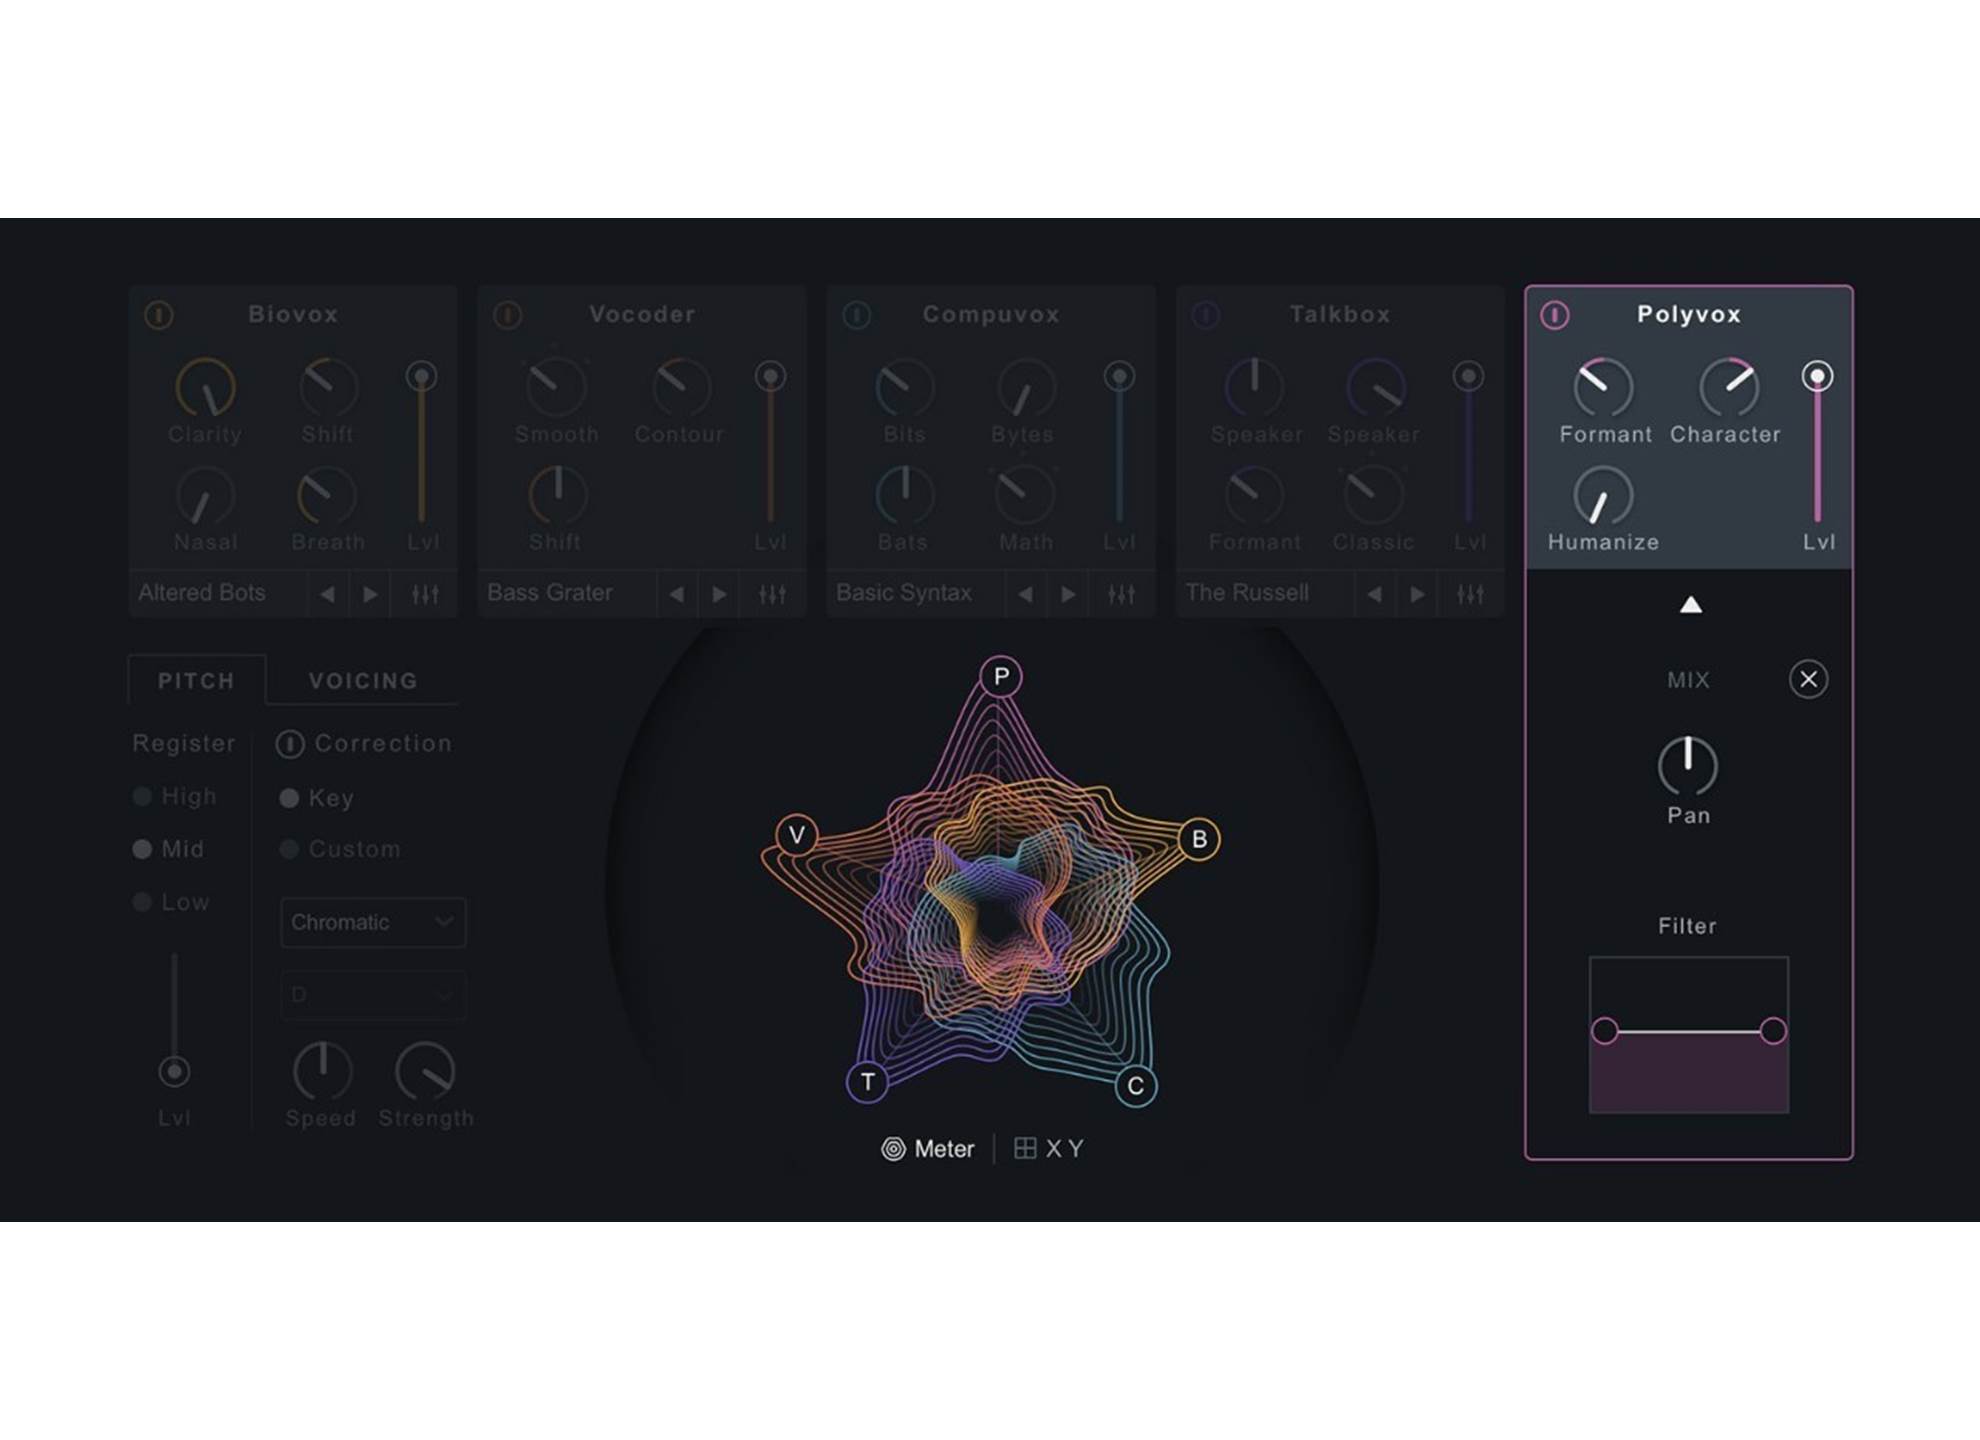 iZotope VocalSynth 2.6.1 instaling